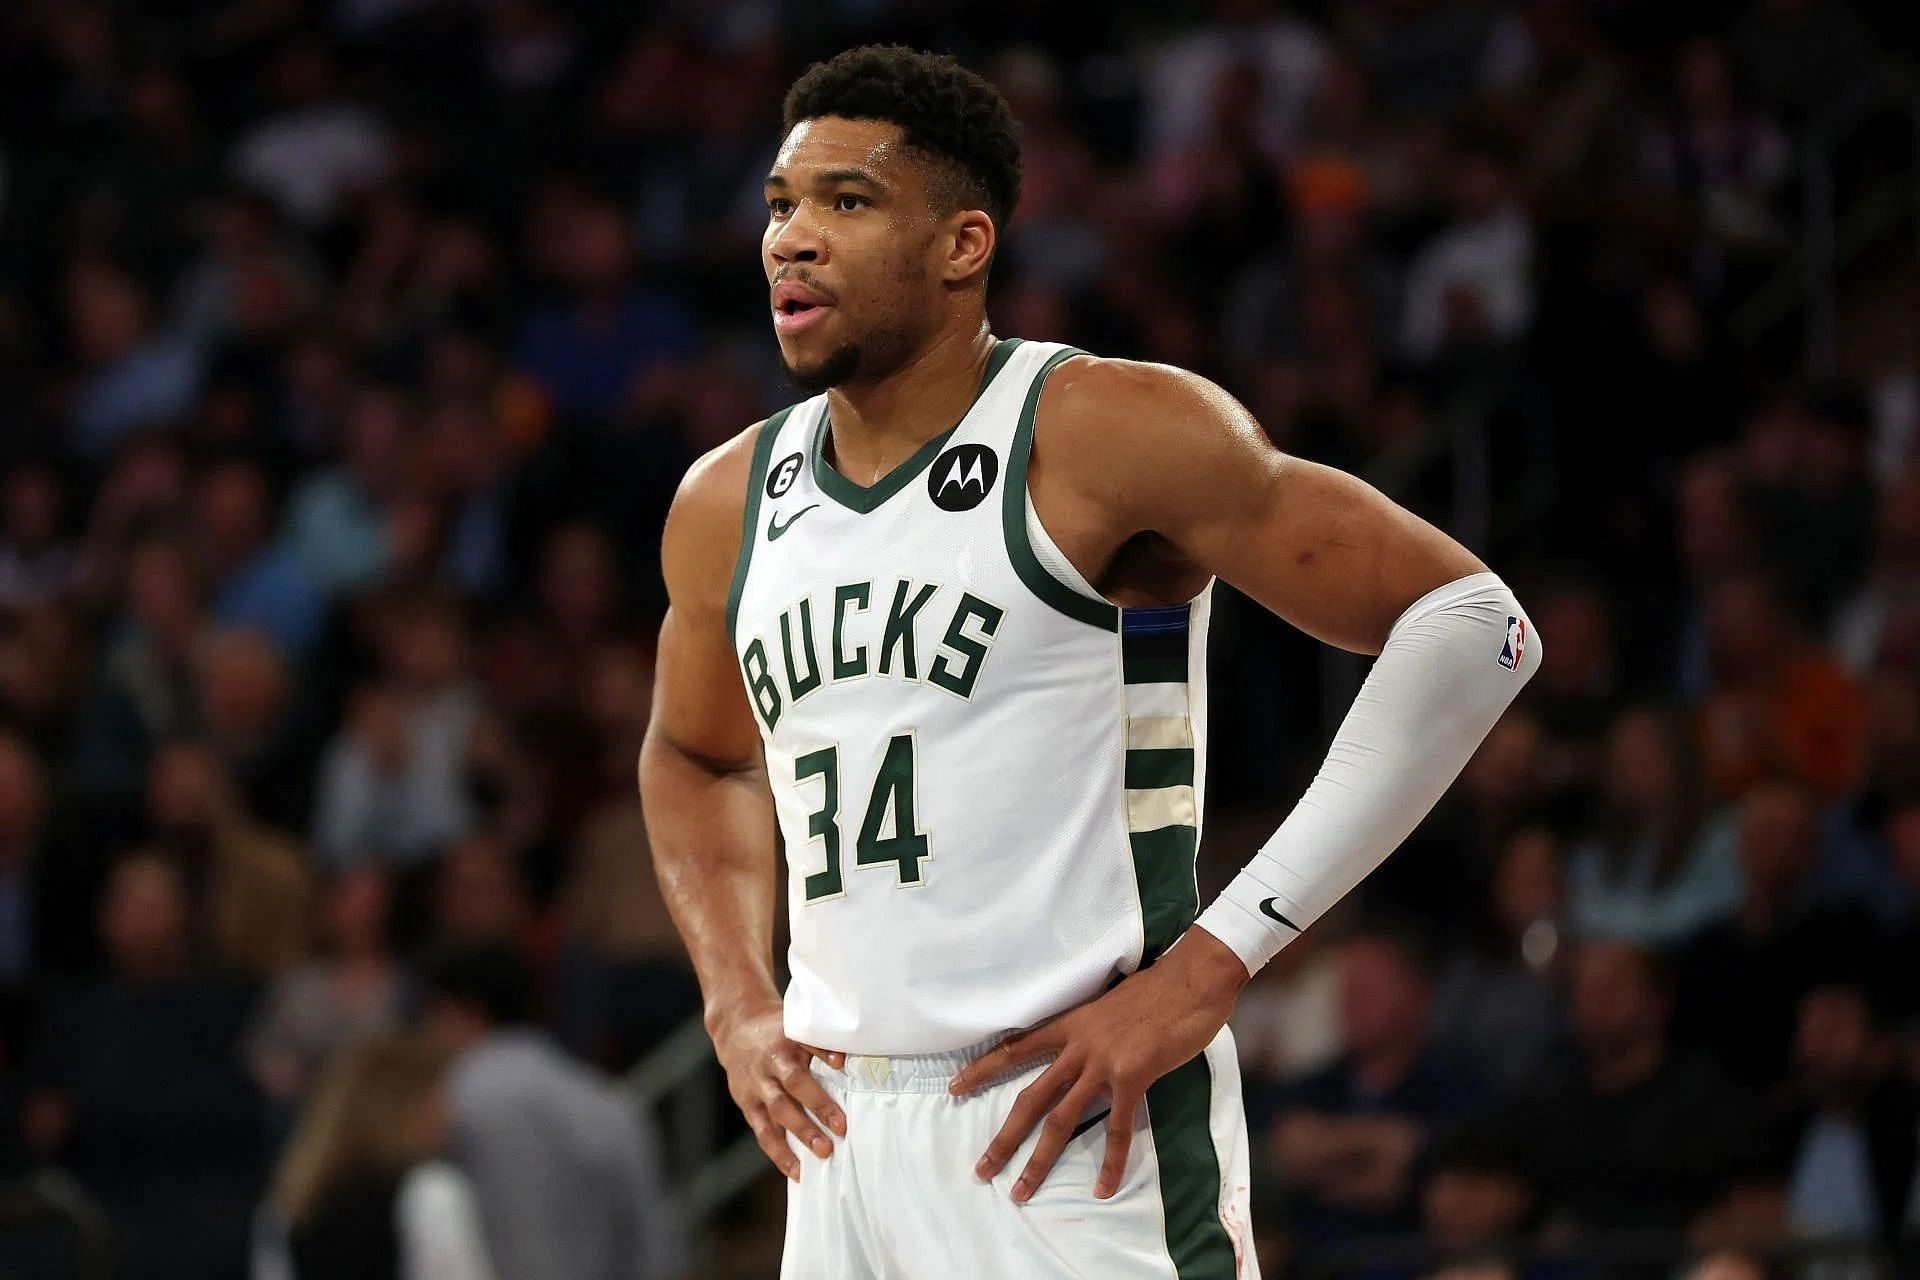 Giannis Antetokounmpo is expected to play in the Milwaukee Bucks